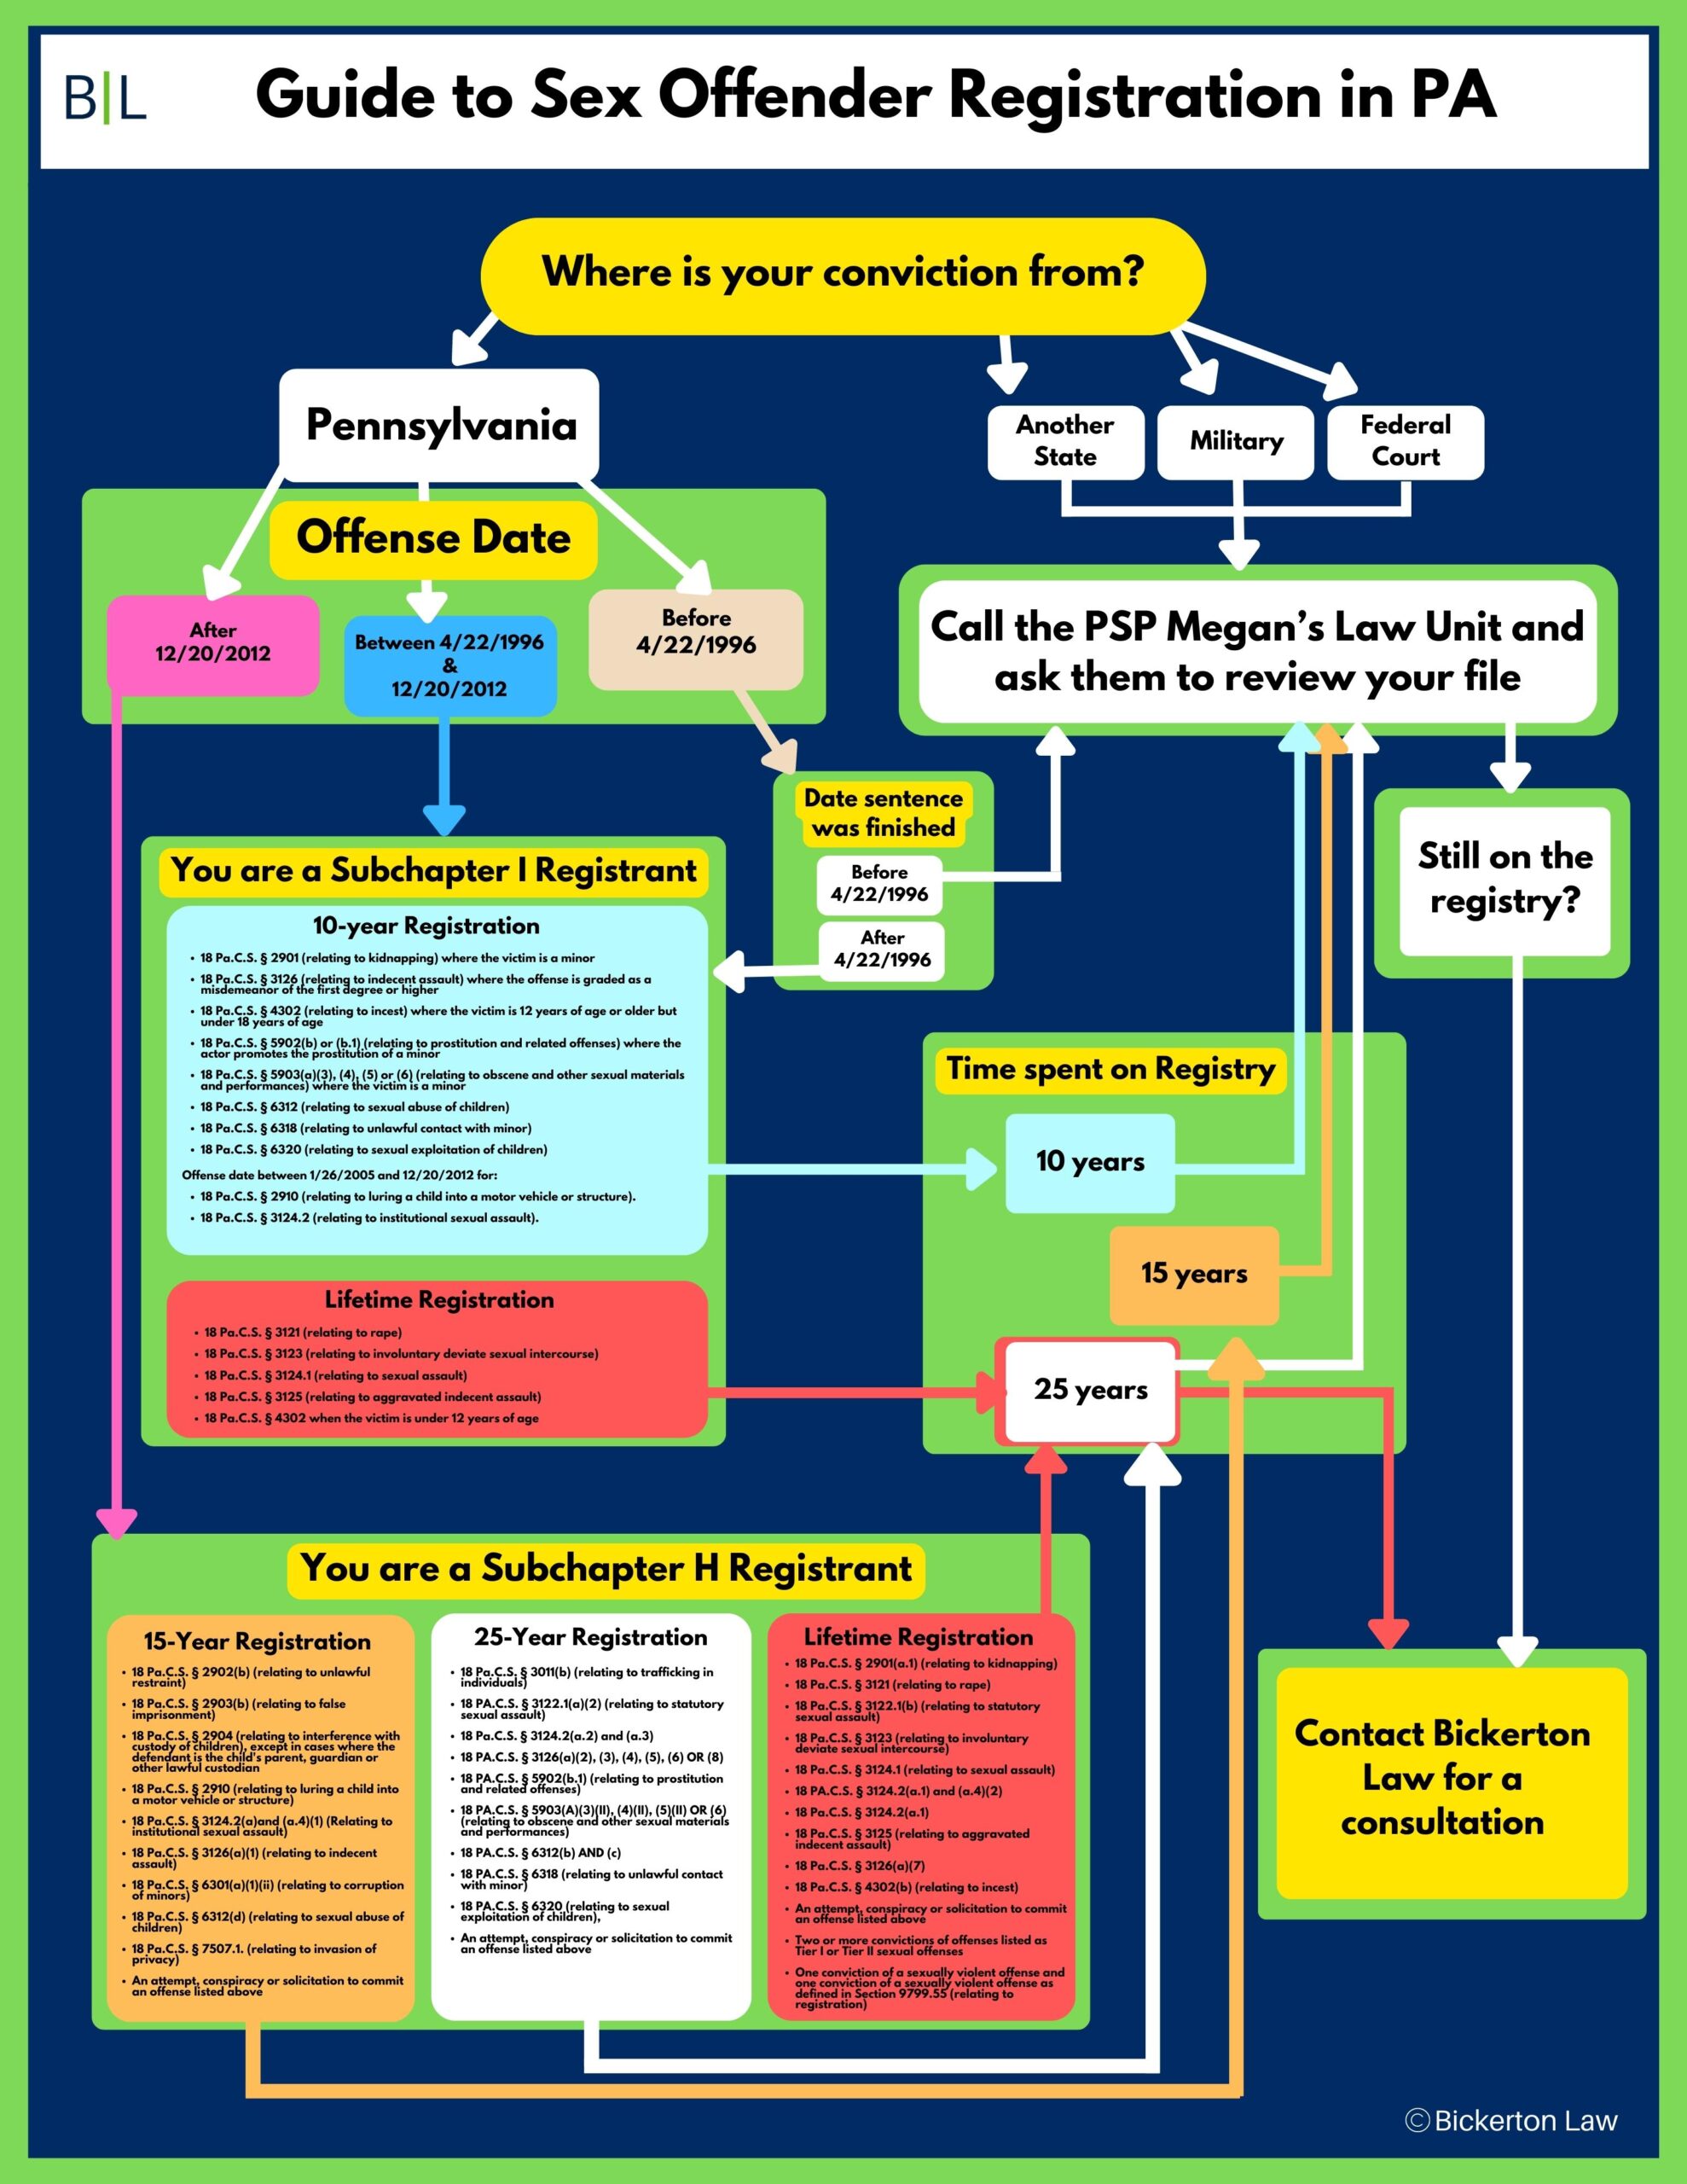 This is a chart explaining when a person can expect to be removed from the sex offender registry in Pennsylvania. It is a flow chart of the registration terms and registrable offenses. It replicates the information in the second half of this page